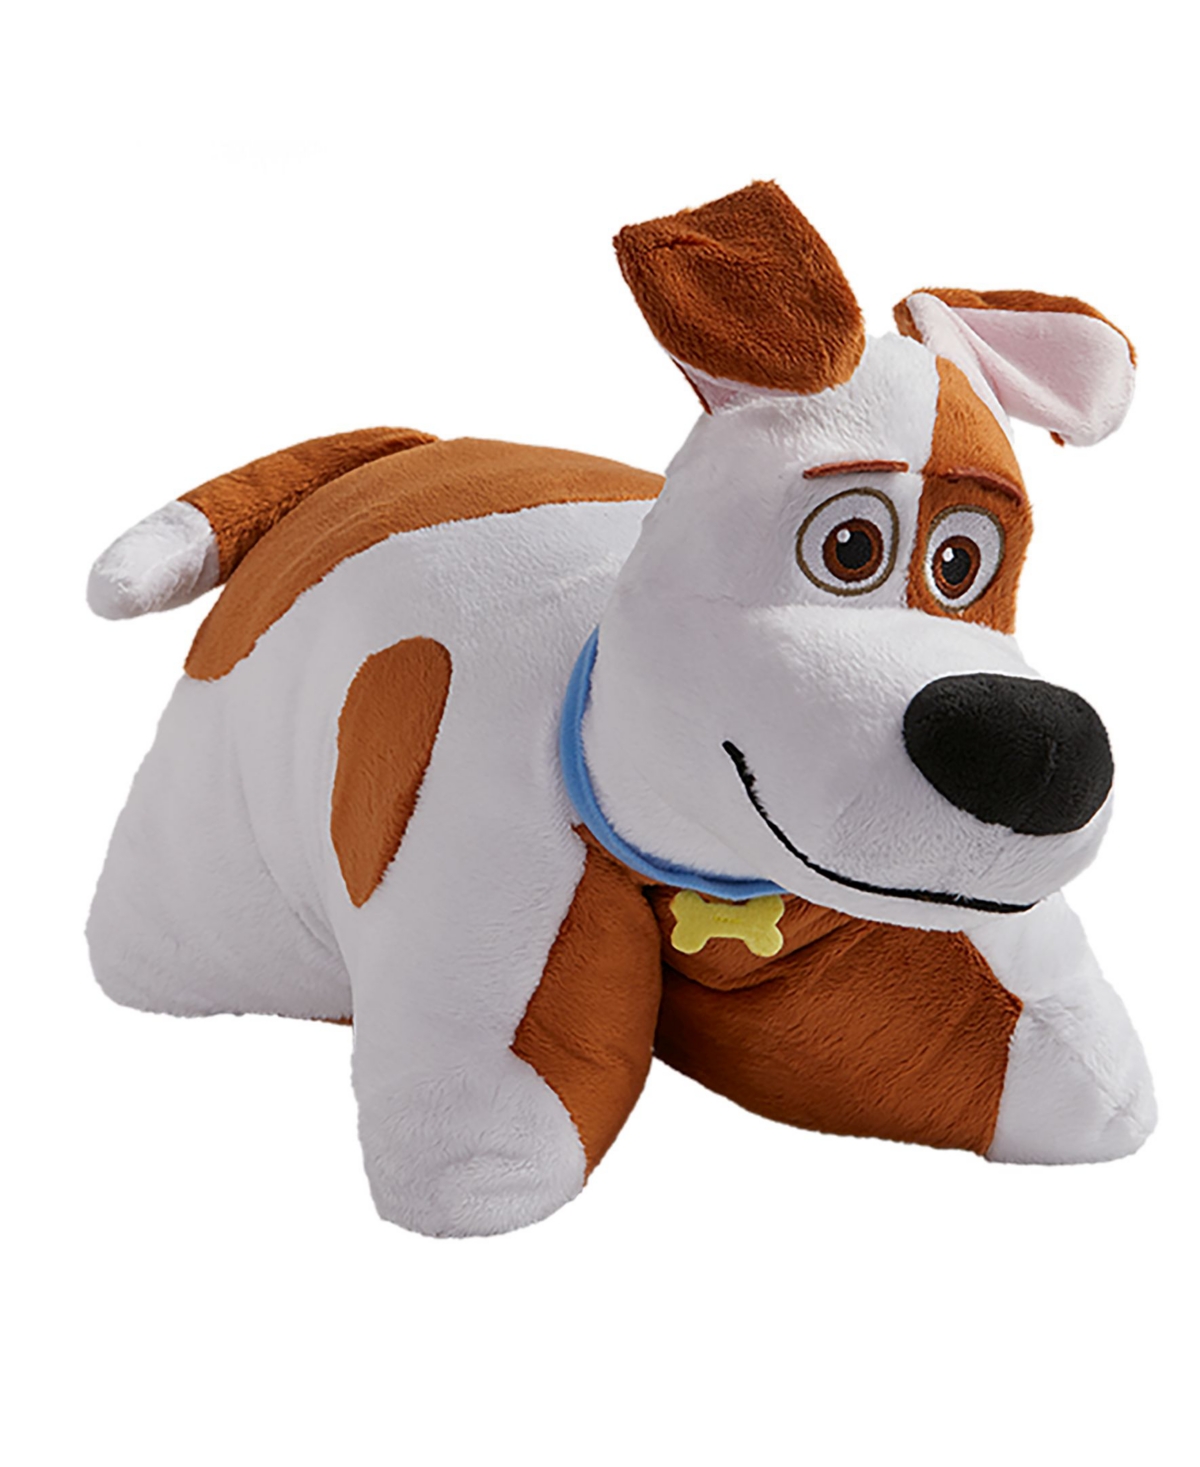 Pillow Pets Nbcuniversal The Secret Life Of Pets Max Stuffed Animal Plush Toy In Brown